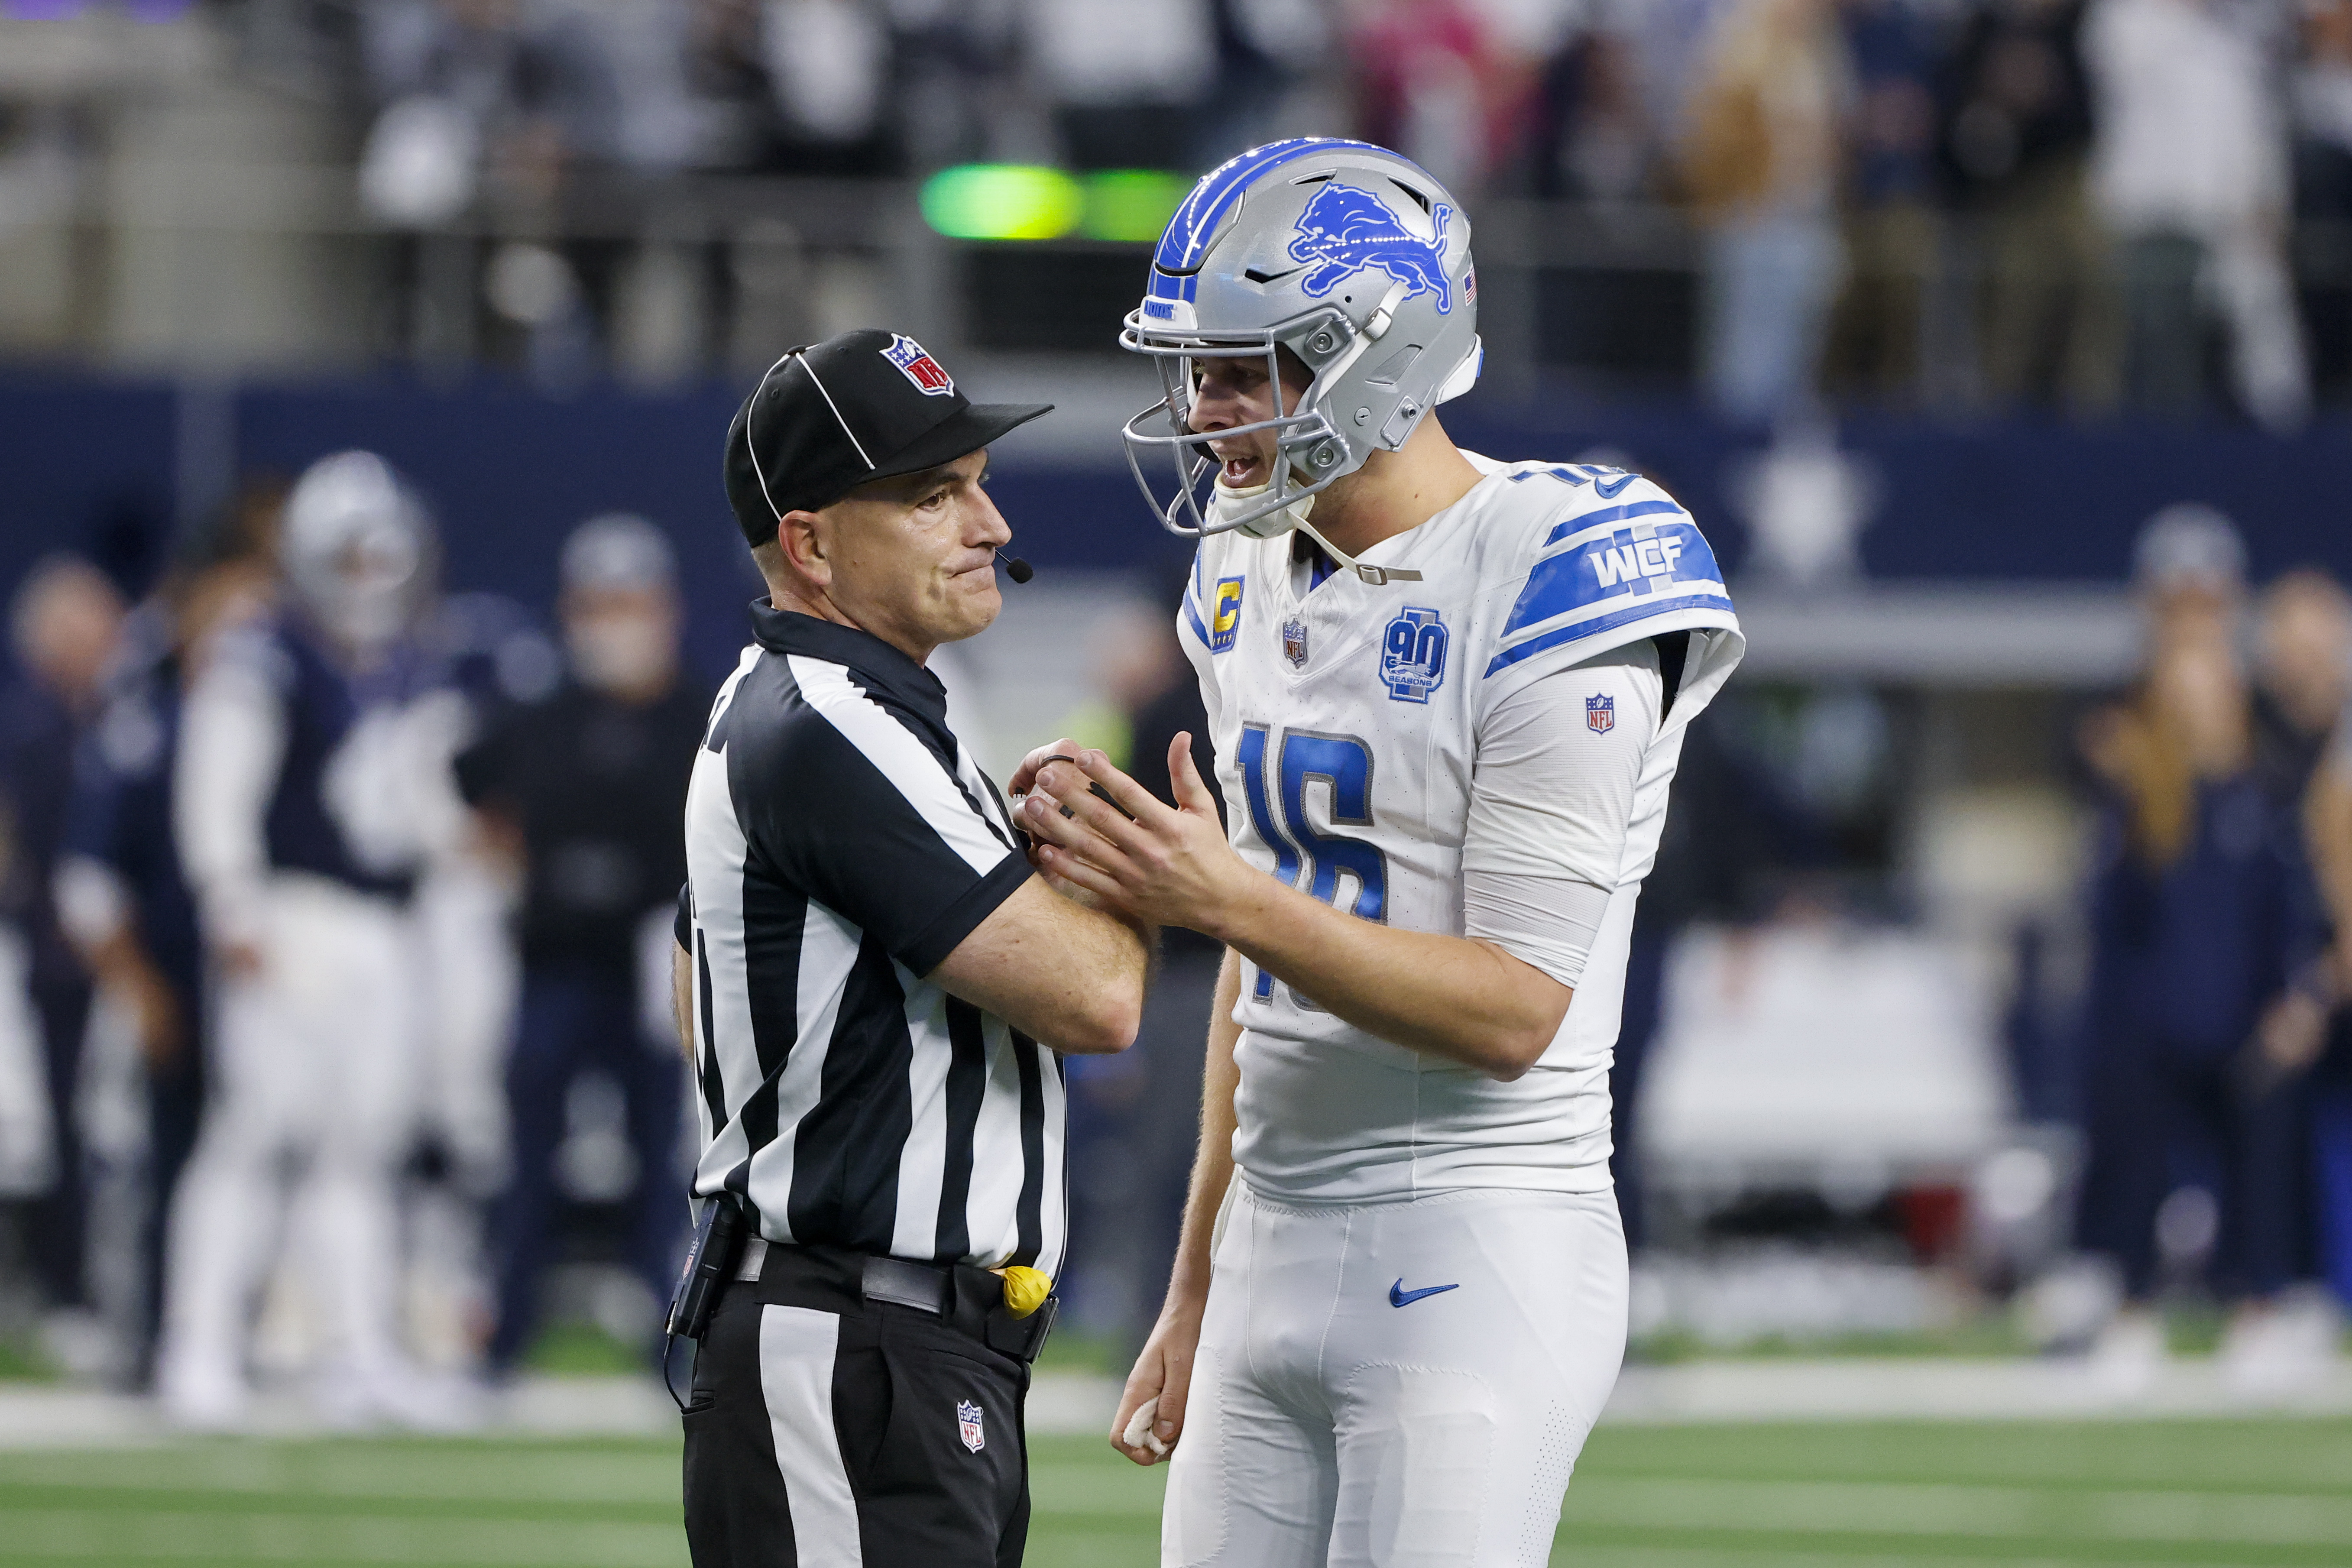 What ref said after botching call in Lions-Cowboys game